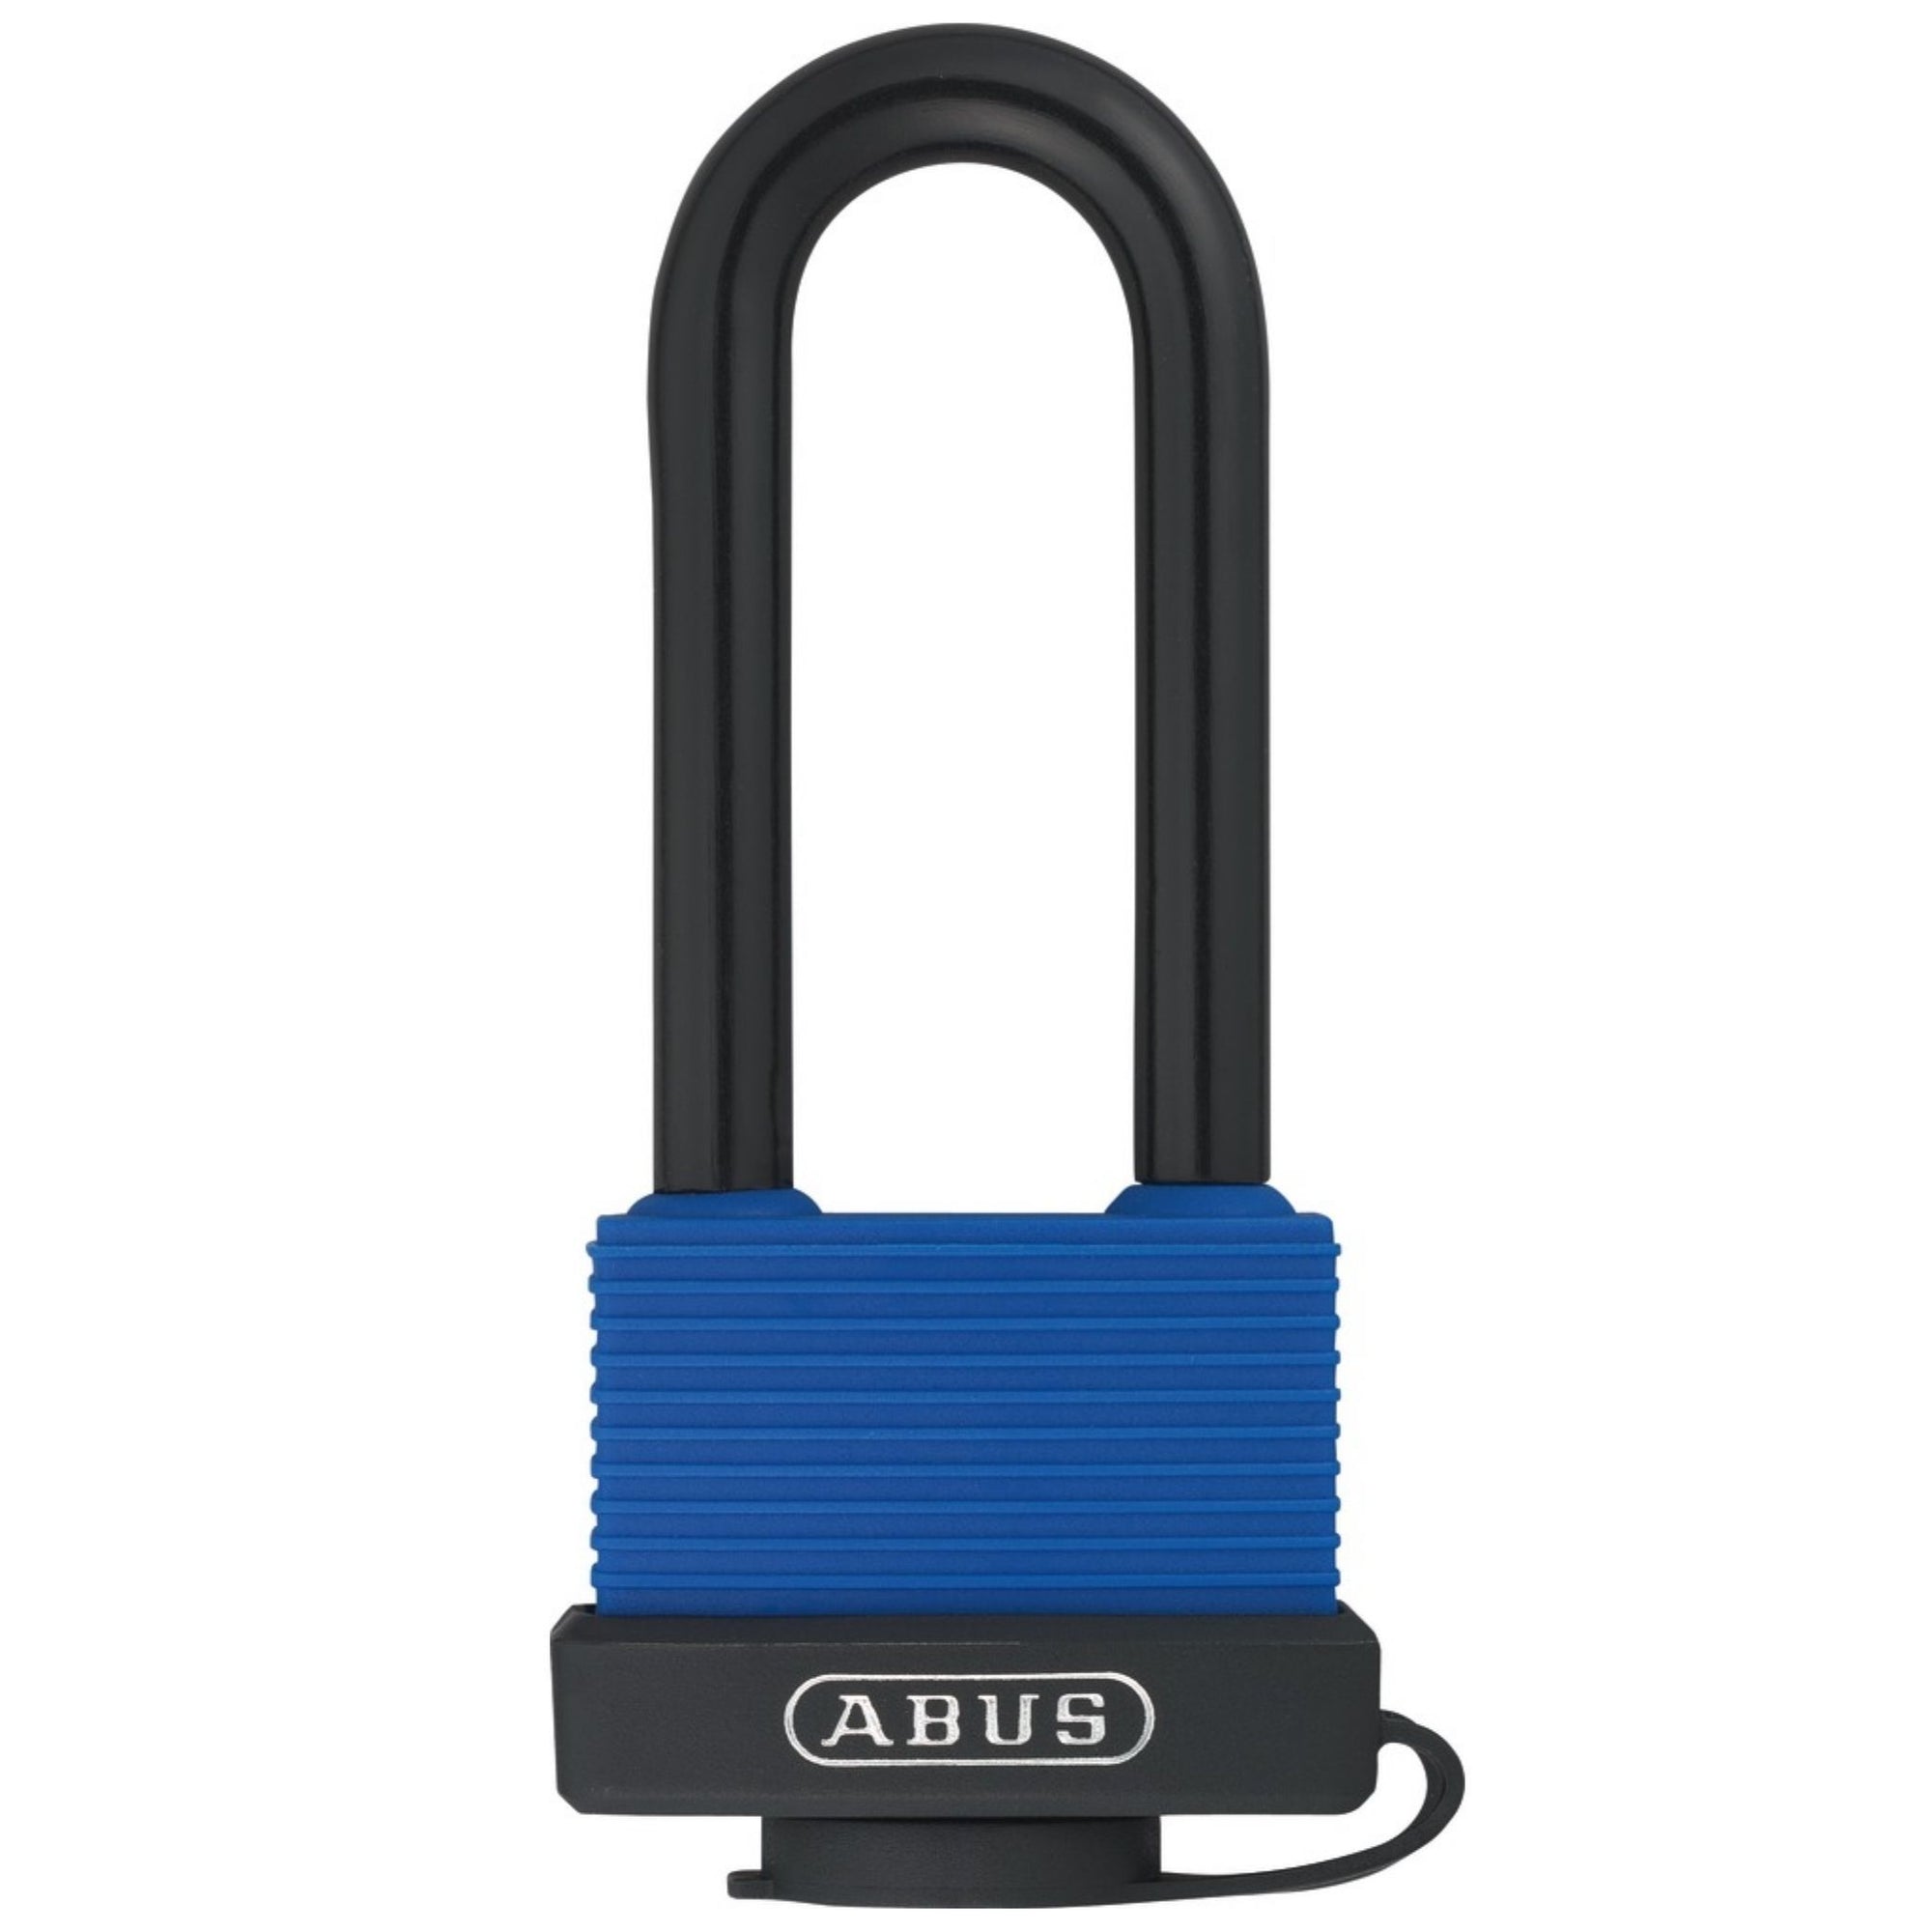 Abus 70IB/45HB63 MK 65402 Weatherproof Brass Padlock with 2-Inch Stainless Steel Shackle Master Keyed to Match Master Key System MK65402 - The Lock Source